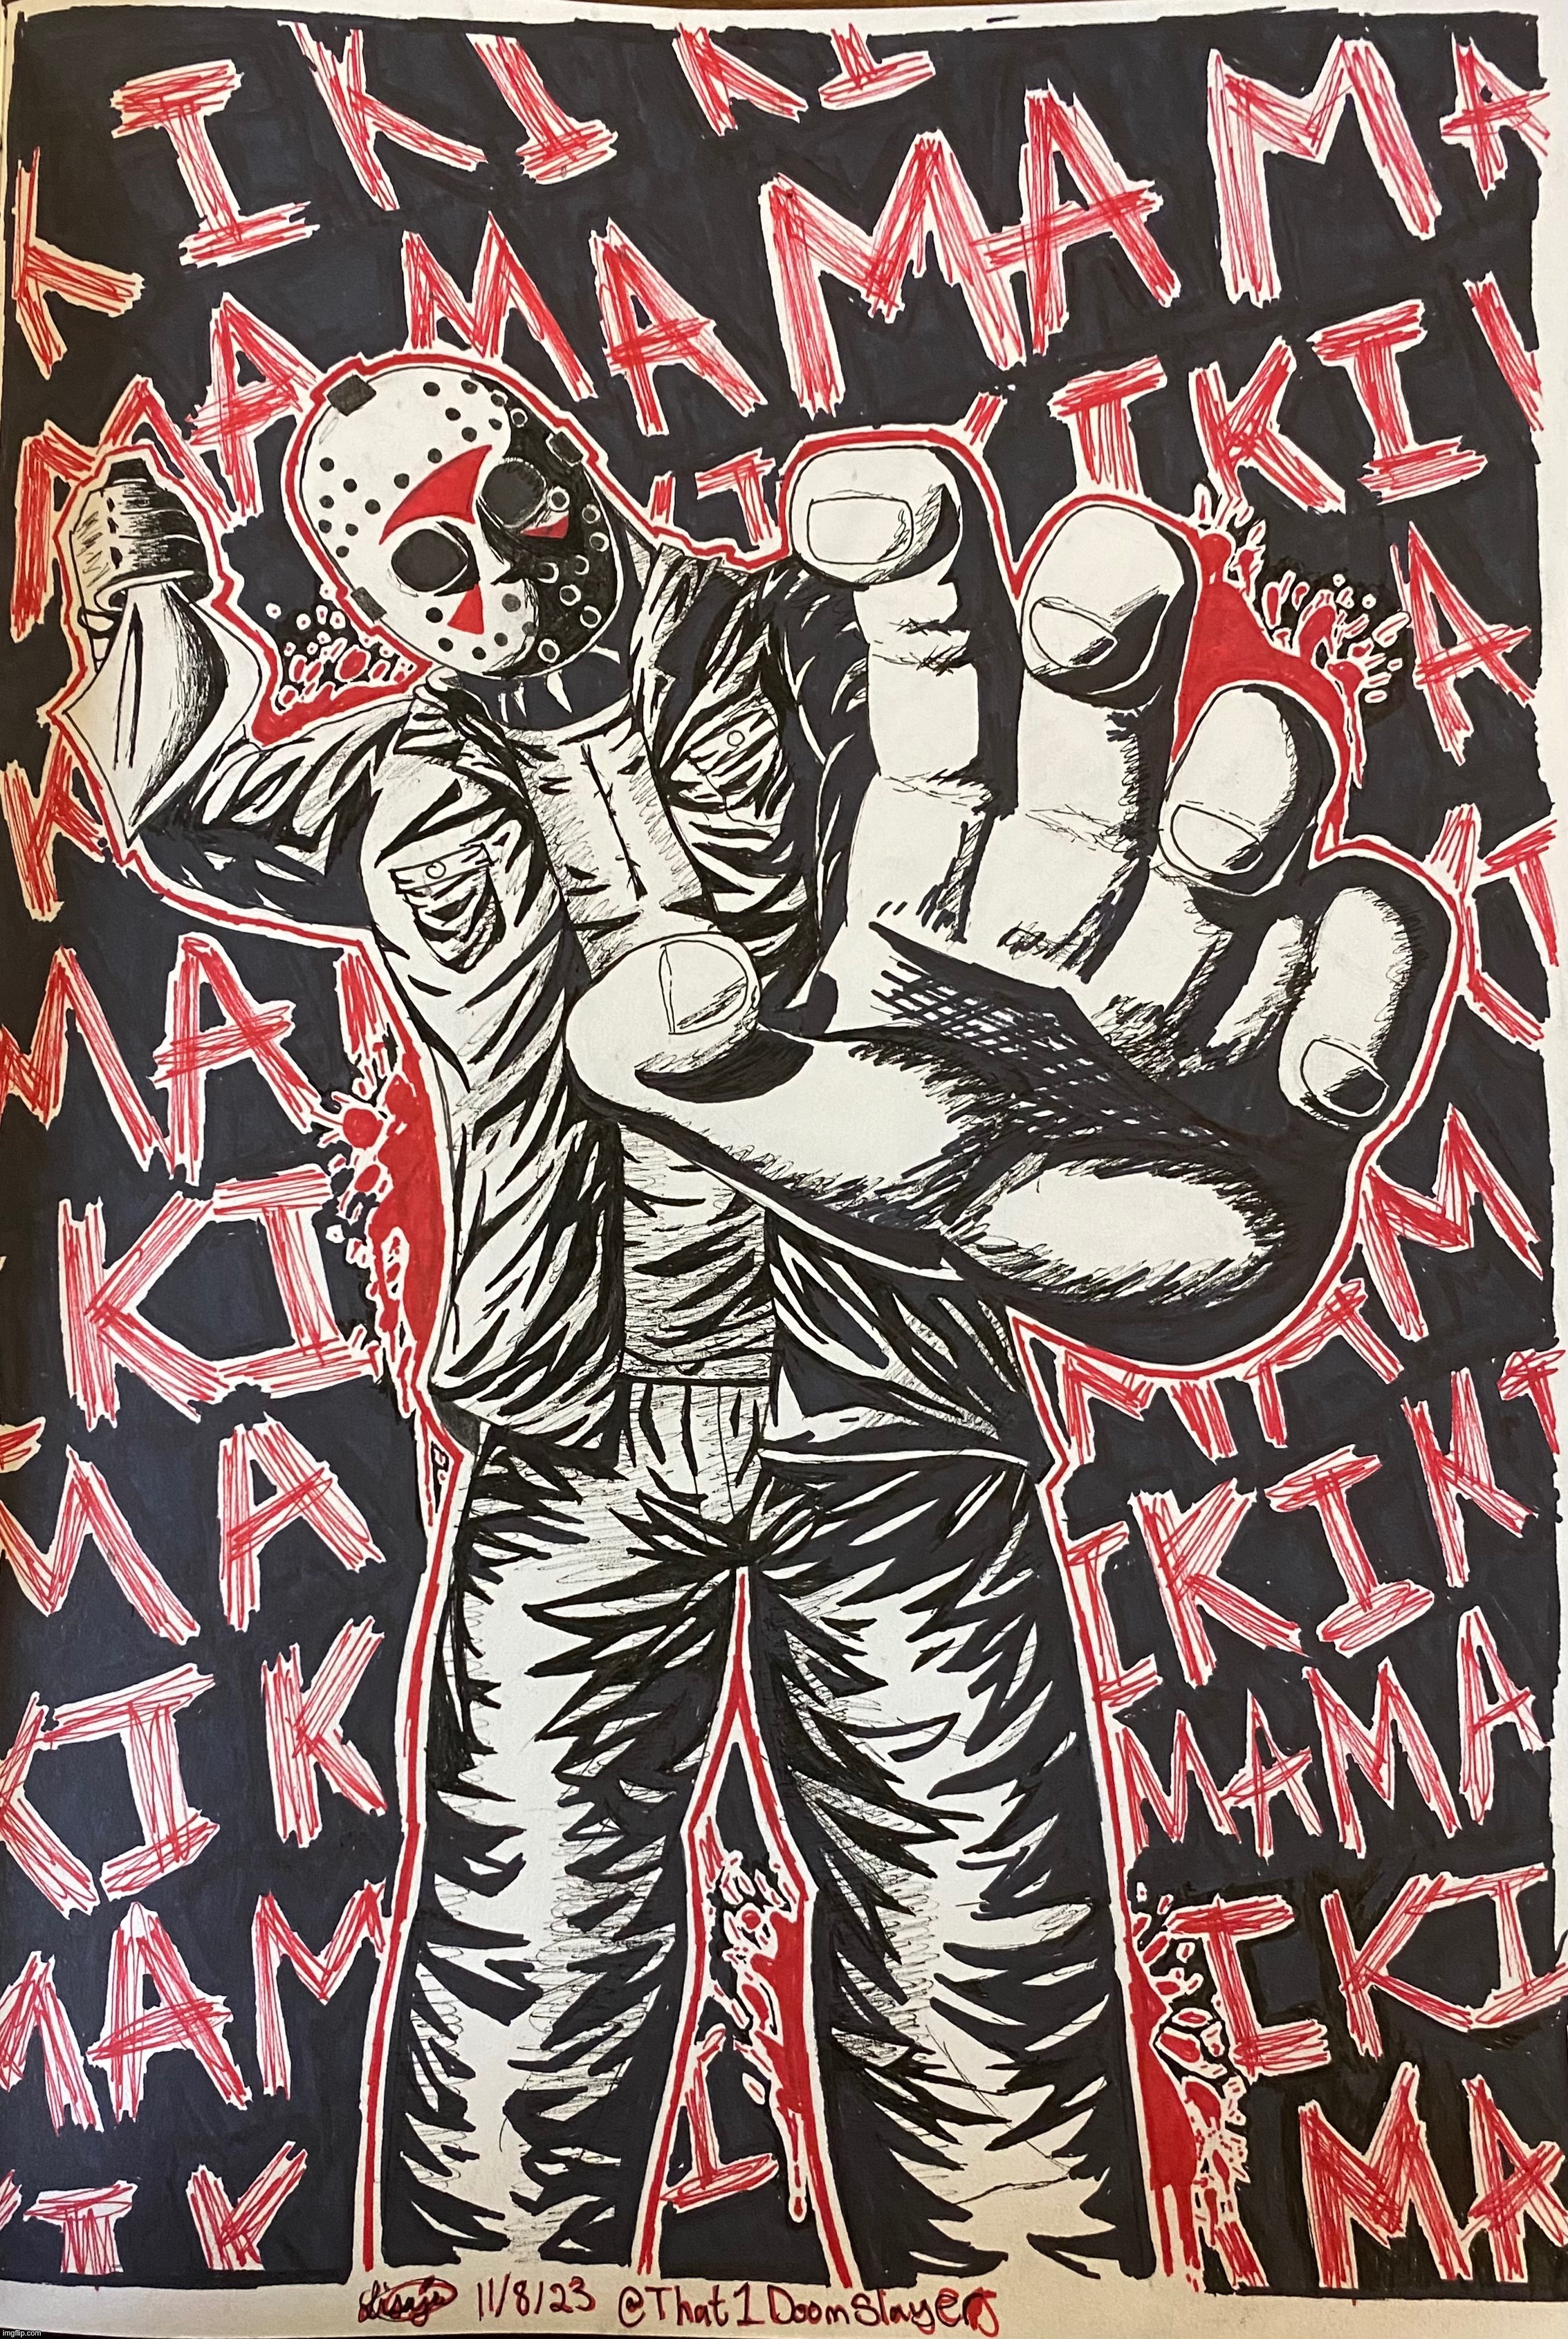 WE GOING CRAZY WITH THE MARKERS YESSIR | image tagged in hell yeah,drawing,jason voorhees,friday the 13th,yippie | made w/ Imgflip meme maker